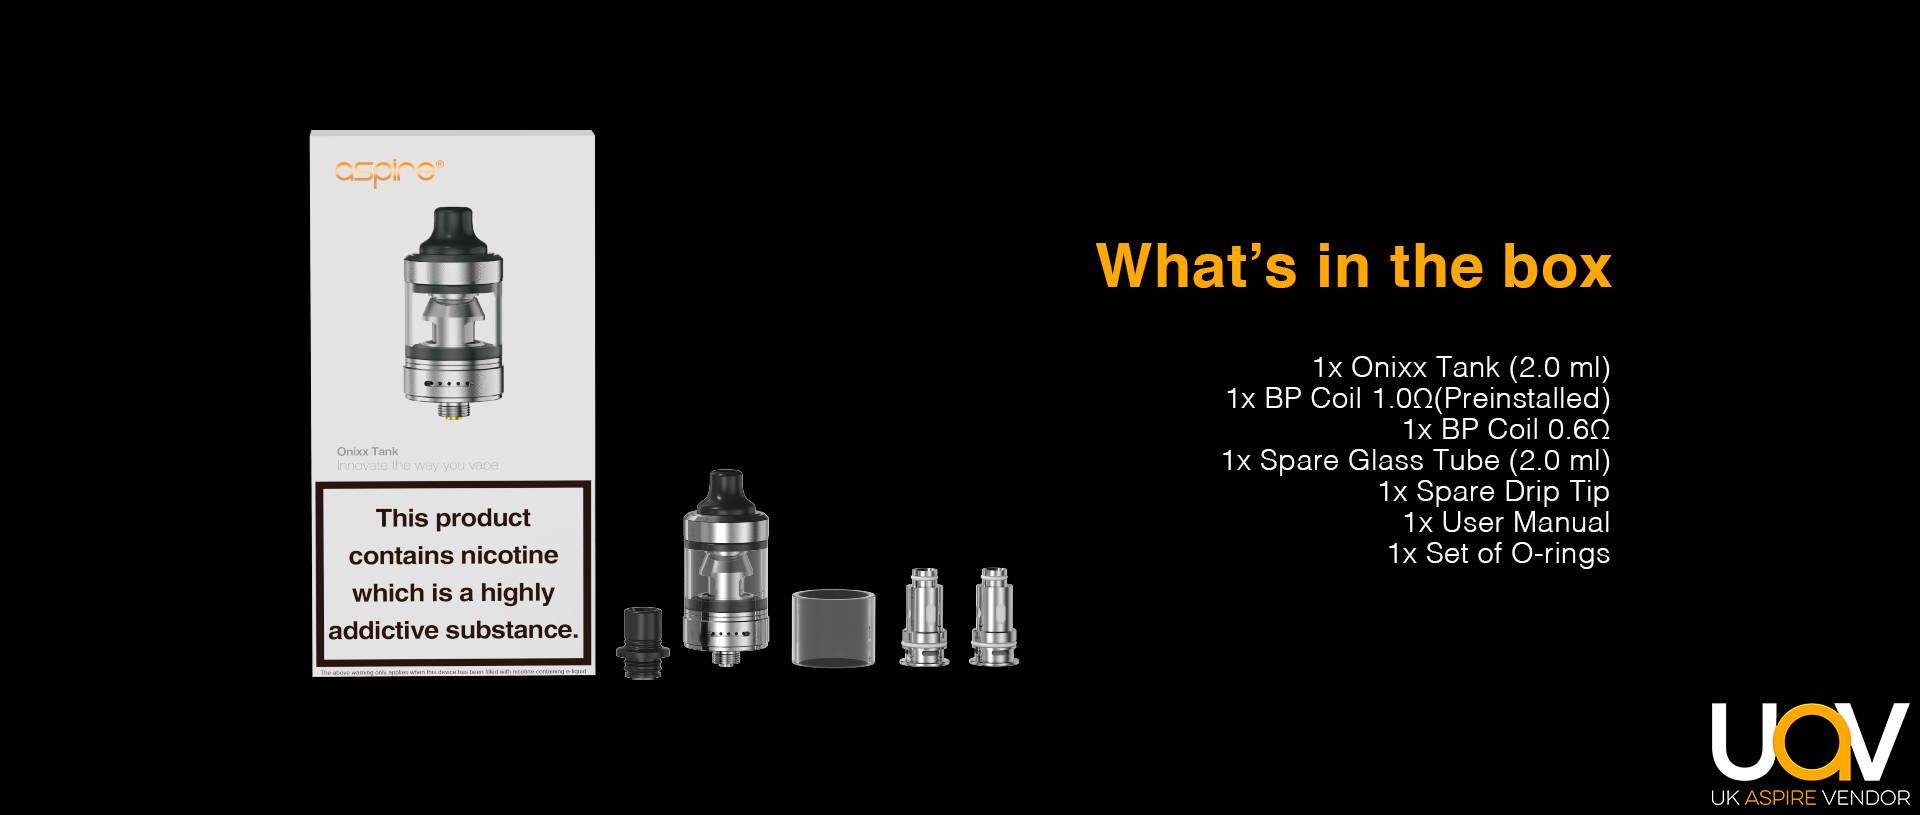 TPD Version  1* Onixx Tank (2.0 ml) 1* BP Coil 1.0Ω(Preinstalled) 1* BP Coil 0.6Ω 1* Spare Glass Tube (2.0 ml) 1* Spare Drip Tip 1* User Manual 1 Set of O-rings